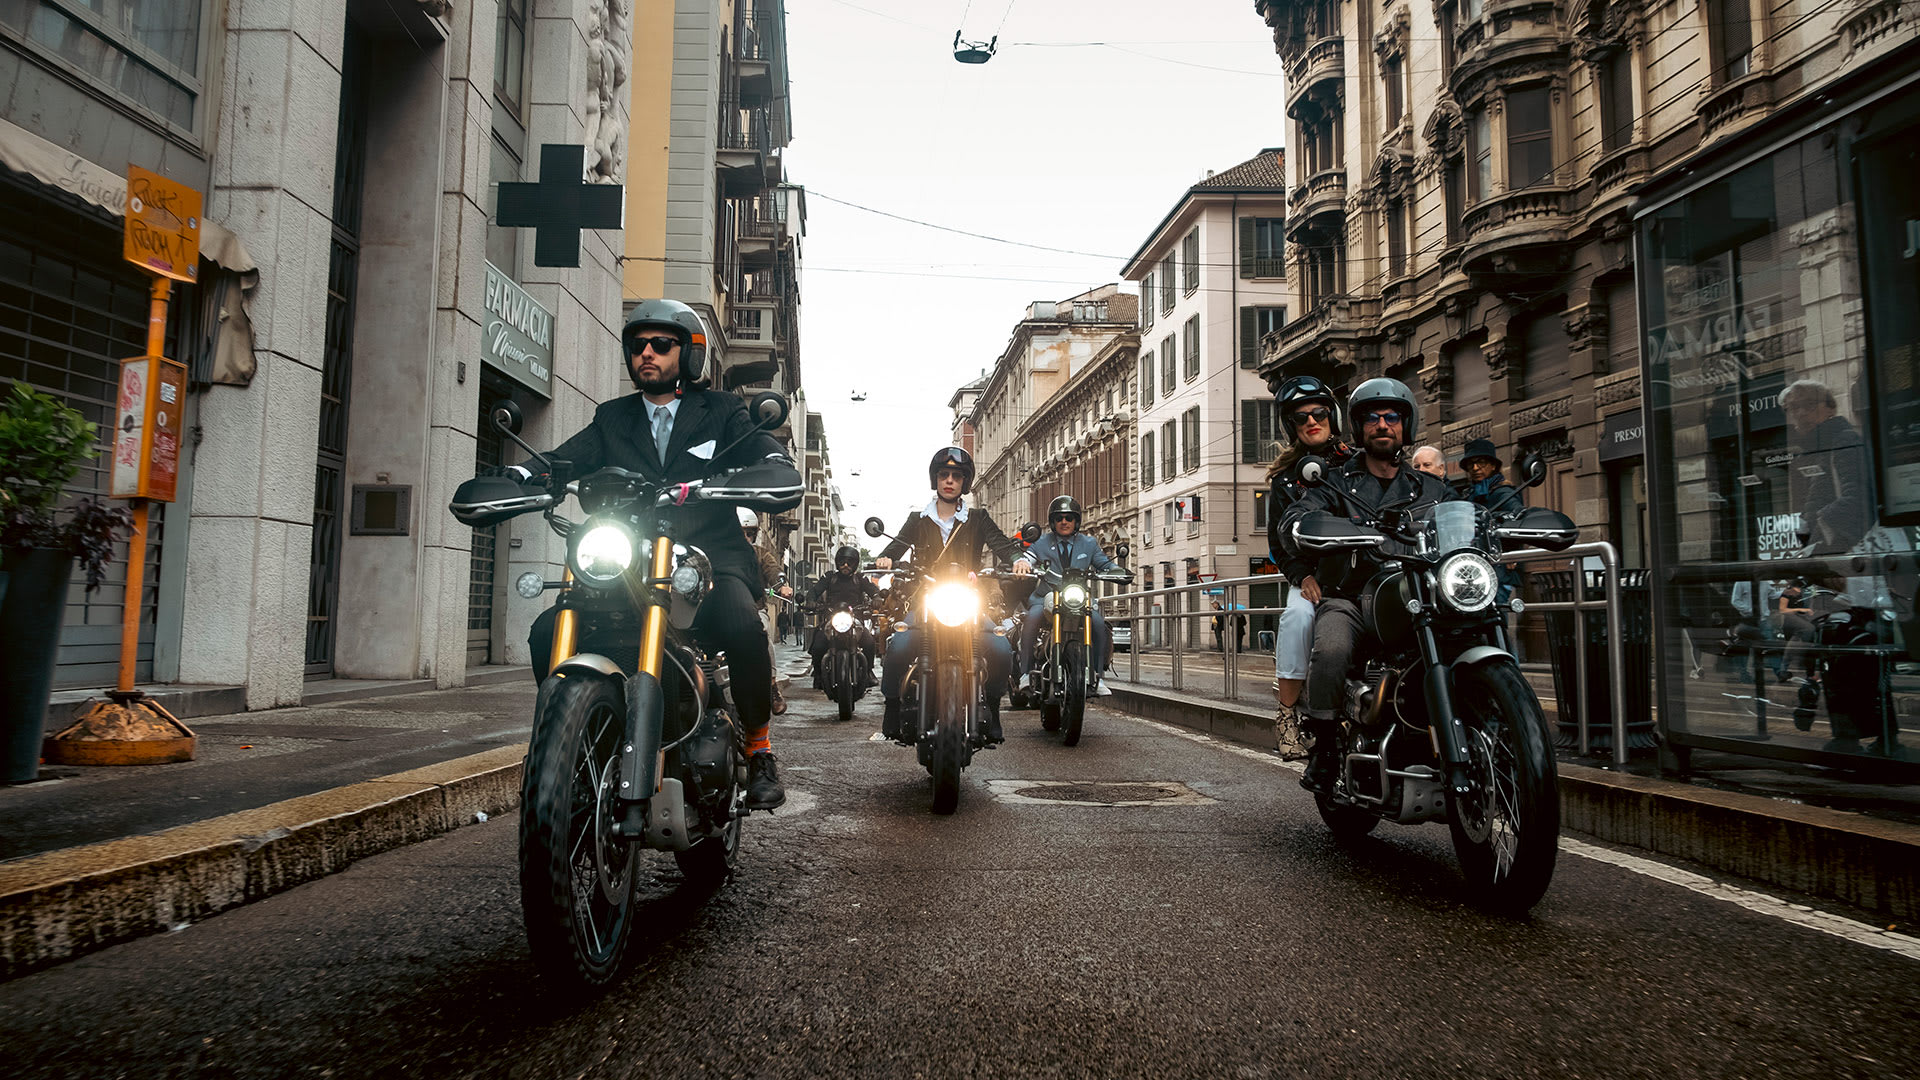 2023 DGR Ride with riders on Triumph in Milan